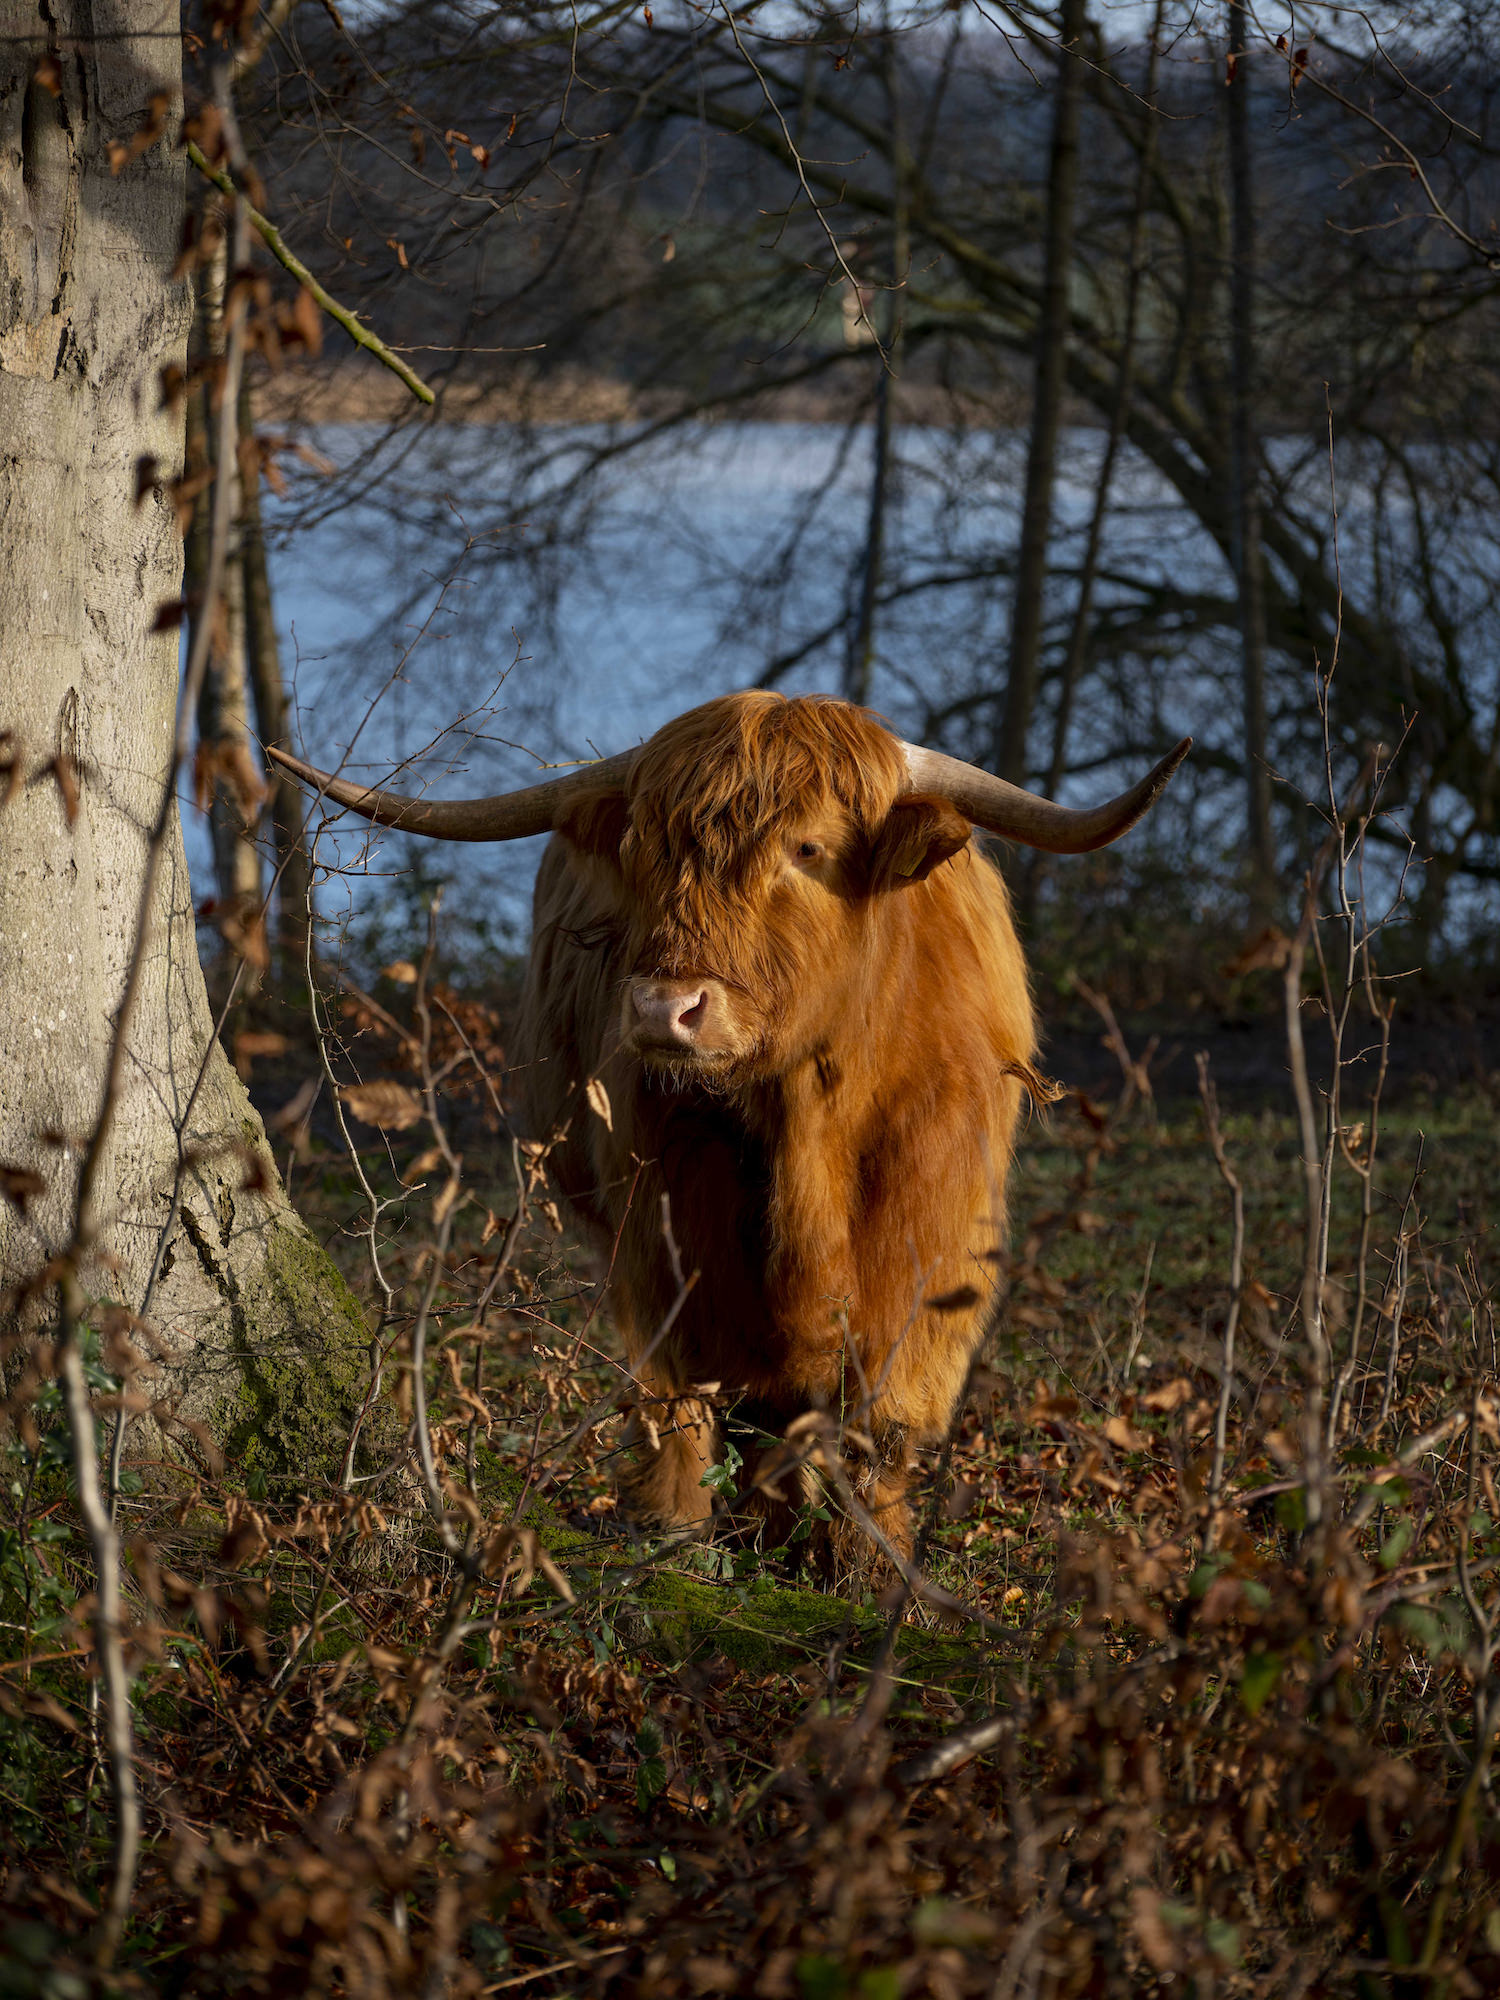 A highland cow with large horns standing in woodland next to a lake